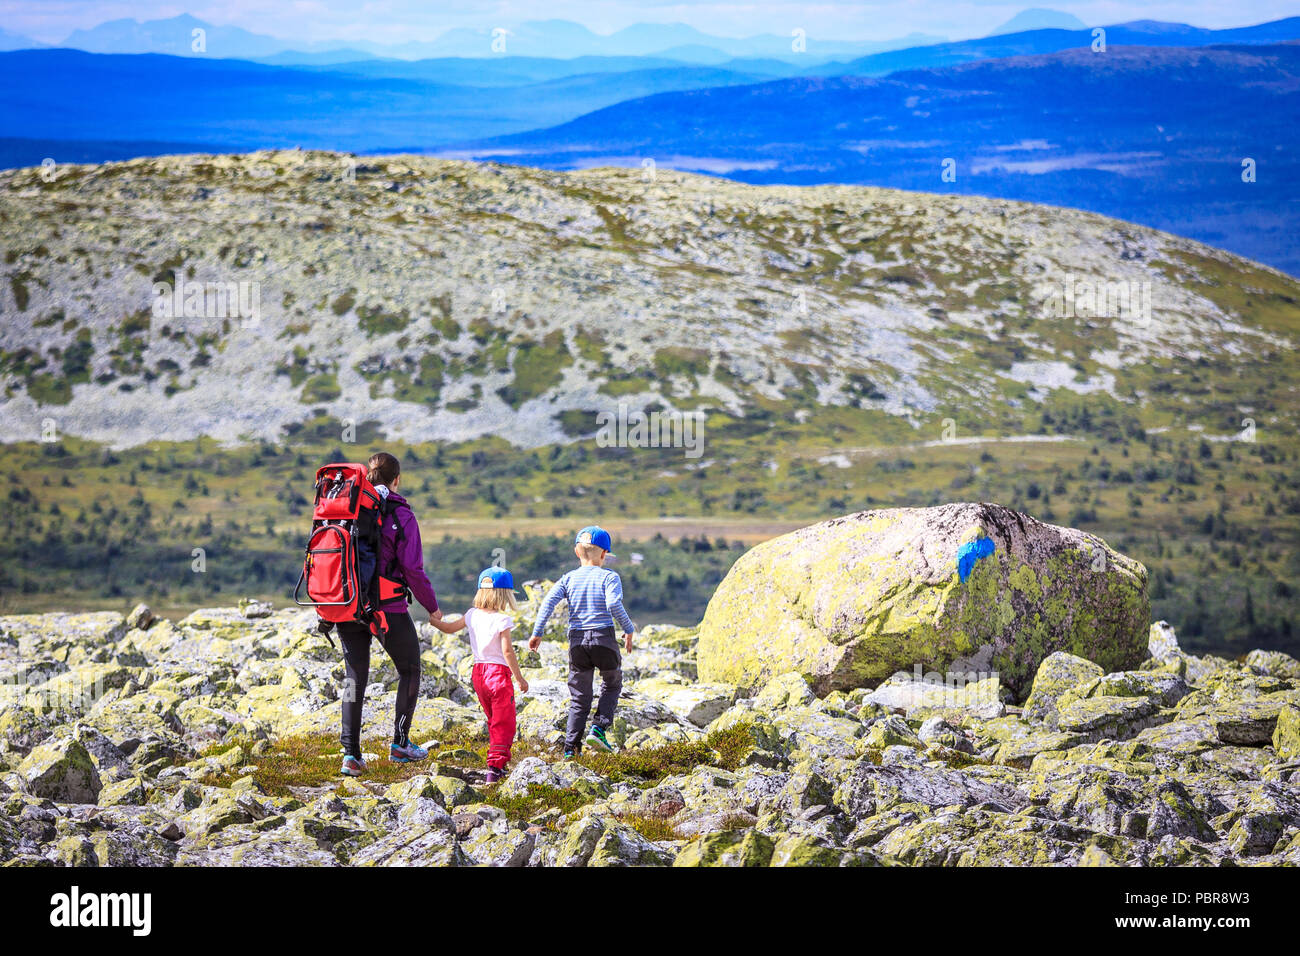 Family on hiking trip on the mountain. Large boulders create a difficult passage. Stock Photo